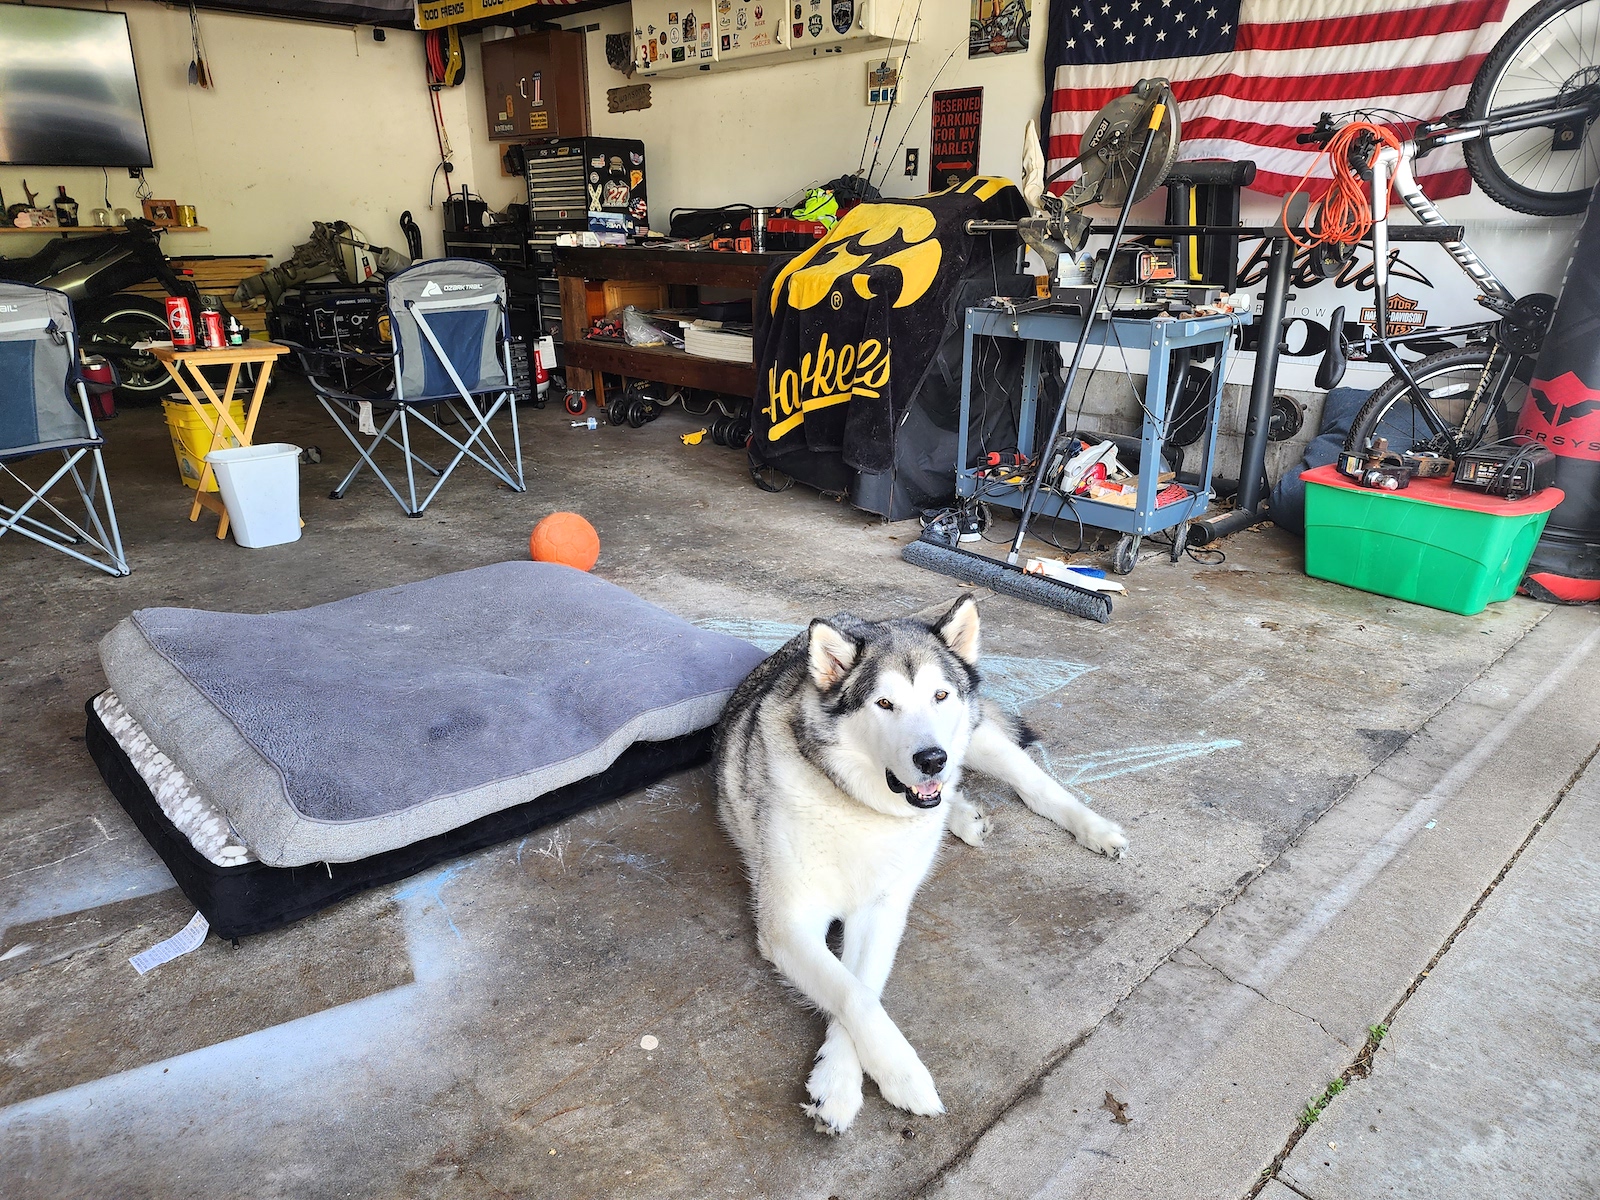 a furry white and gray dog lies on the floor of a garage